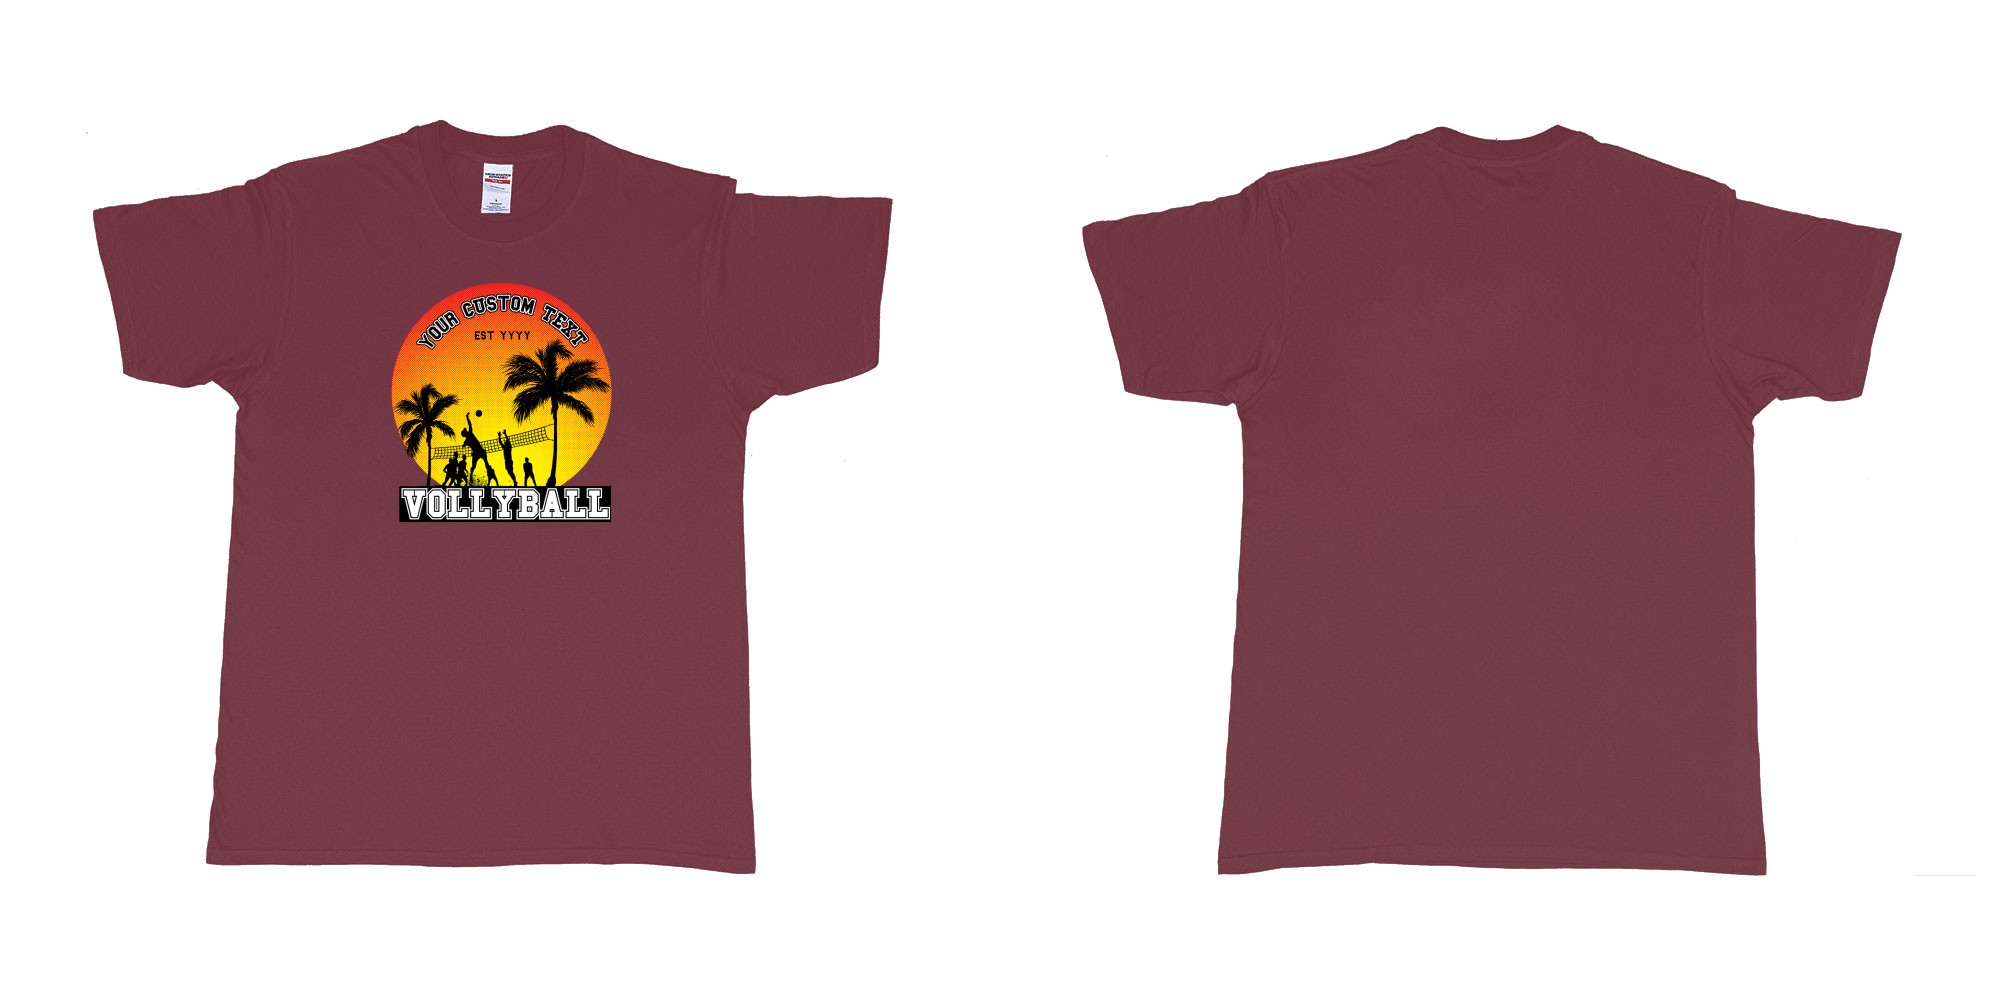 Custom tshirt design  in fabric color marron choice your own text made in Bali by The Pirate Way